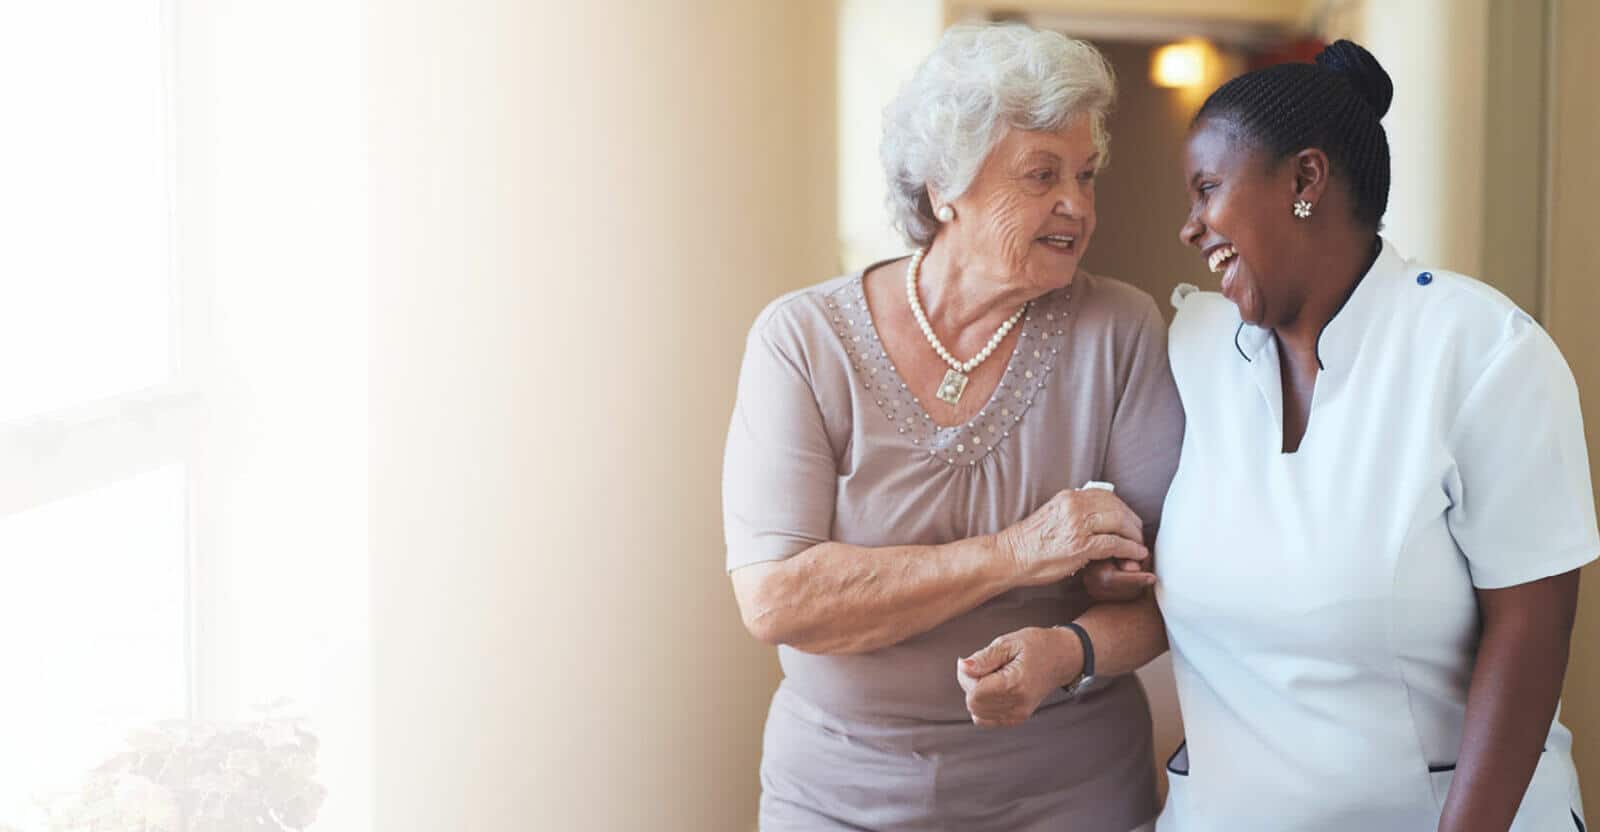 Older woman walking down the hall with a nurse, laughing and holding hands